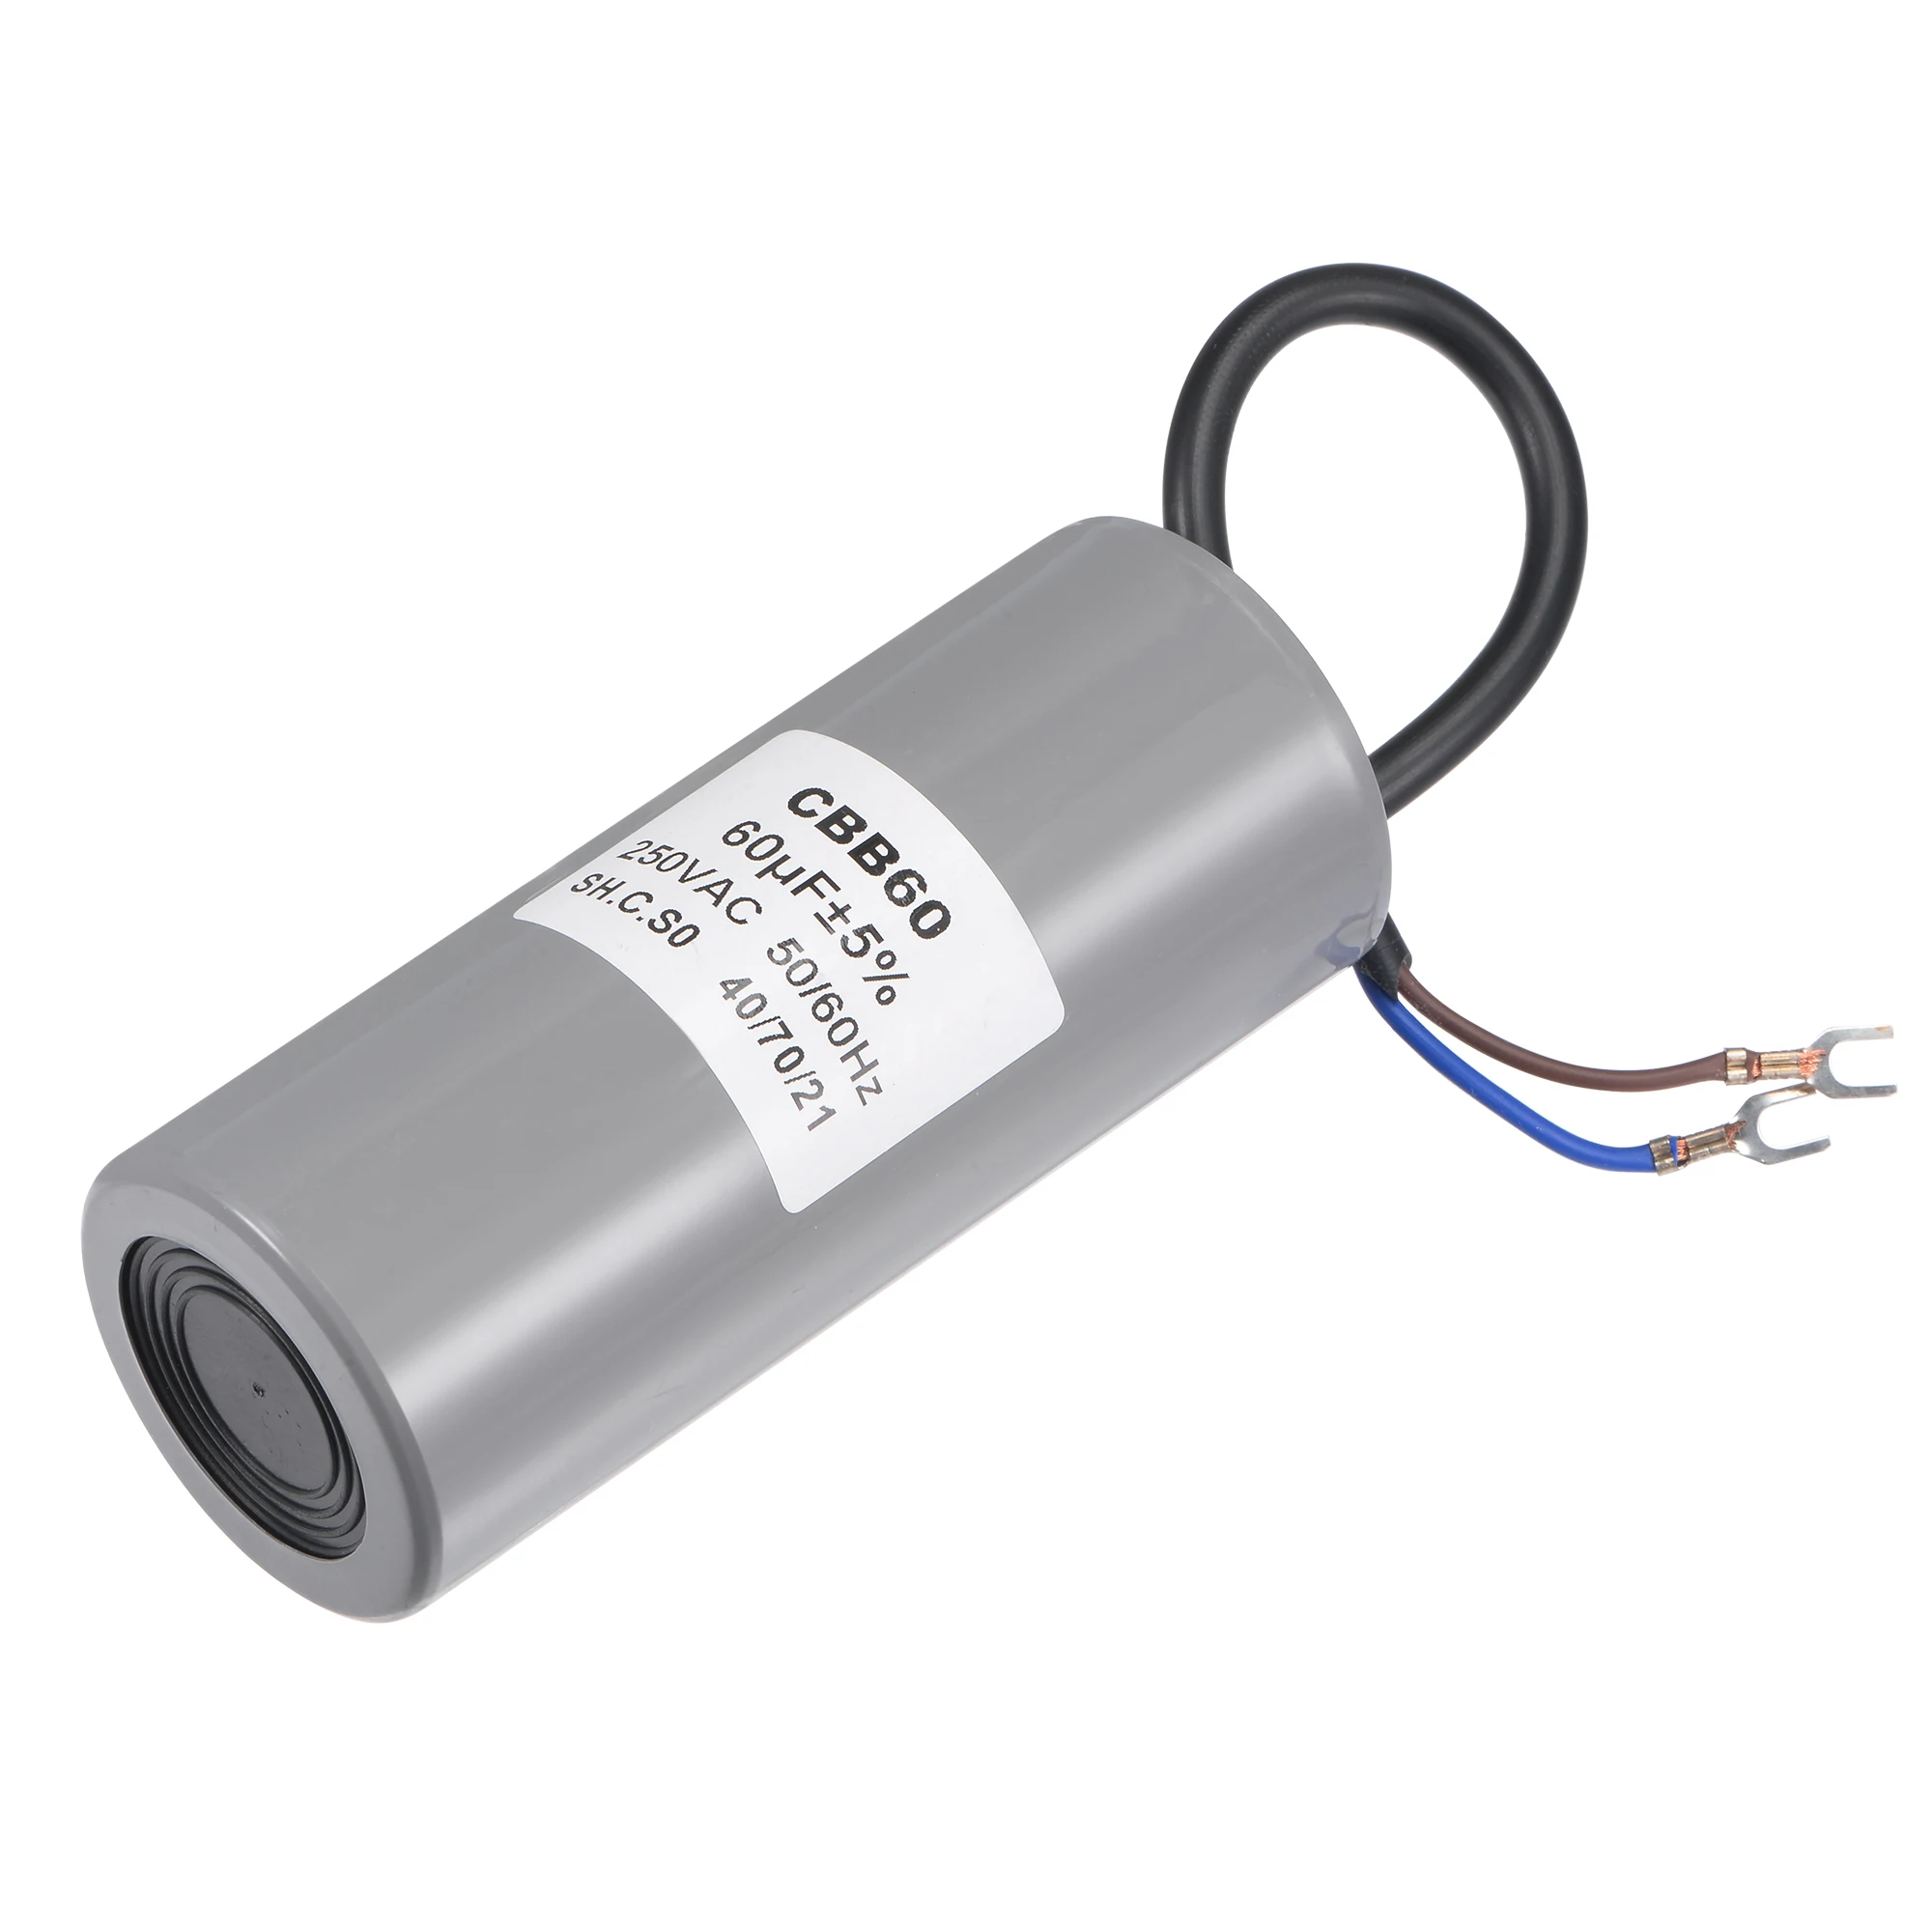 1pcs CBB60 Run Capacitor 60uF 250V AC 2 Wires 50/60Hz Cylinder 124x50mm with Terminal for Air Compressor Water Pump Motor